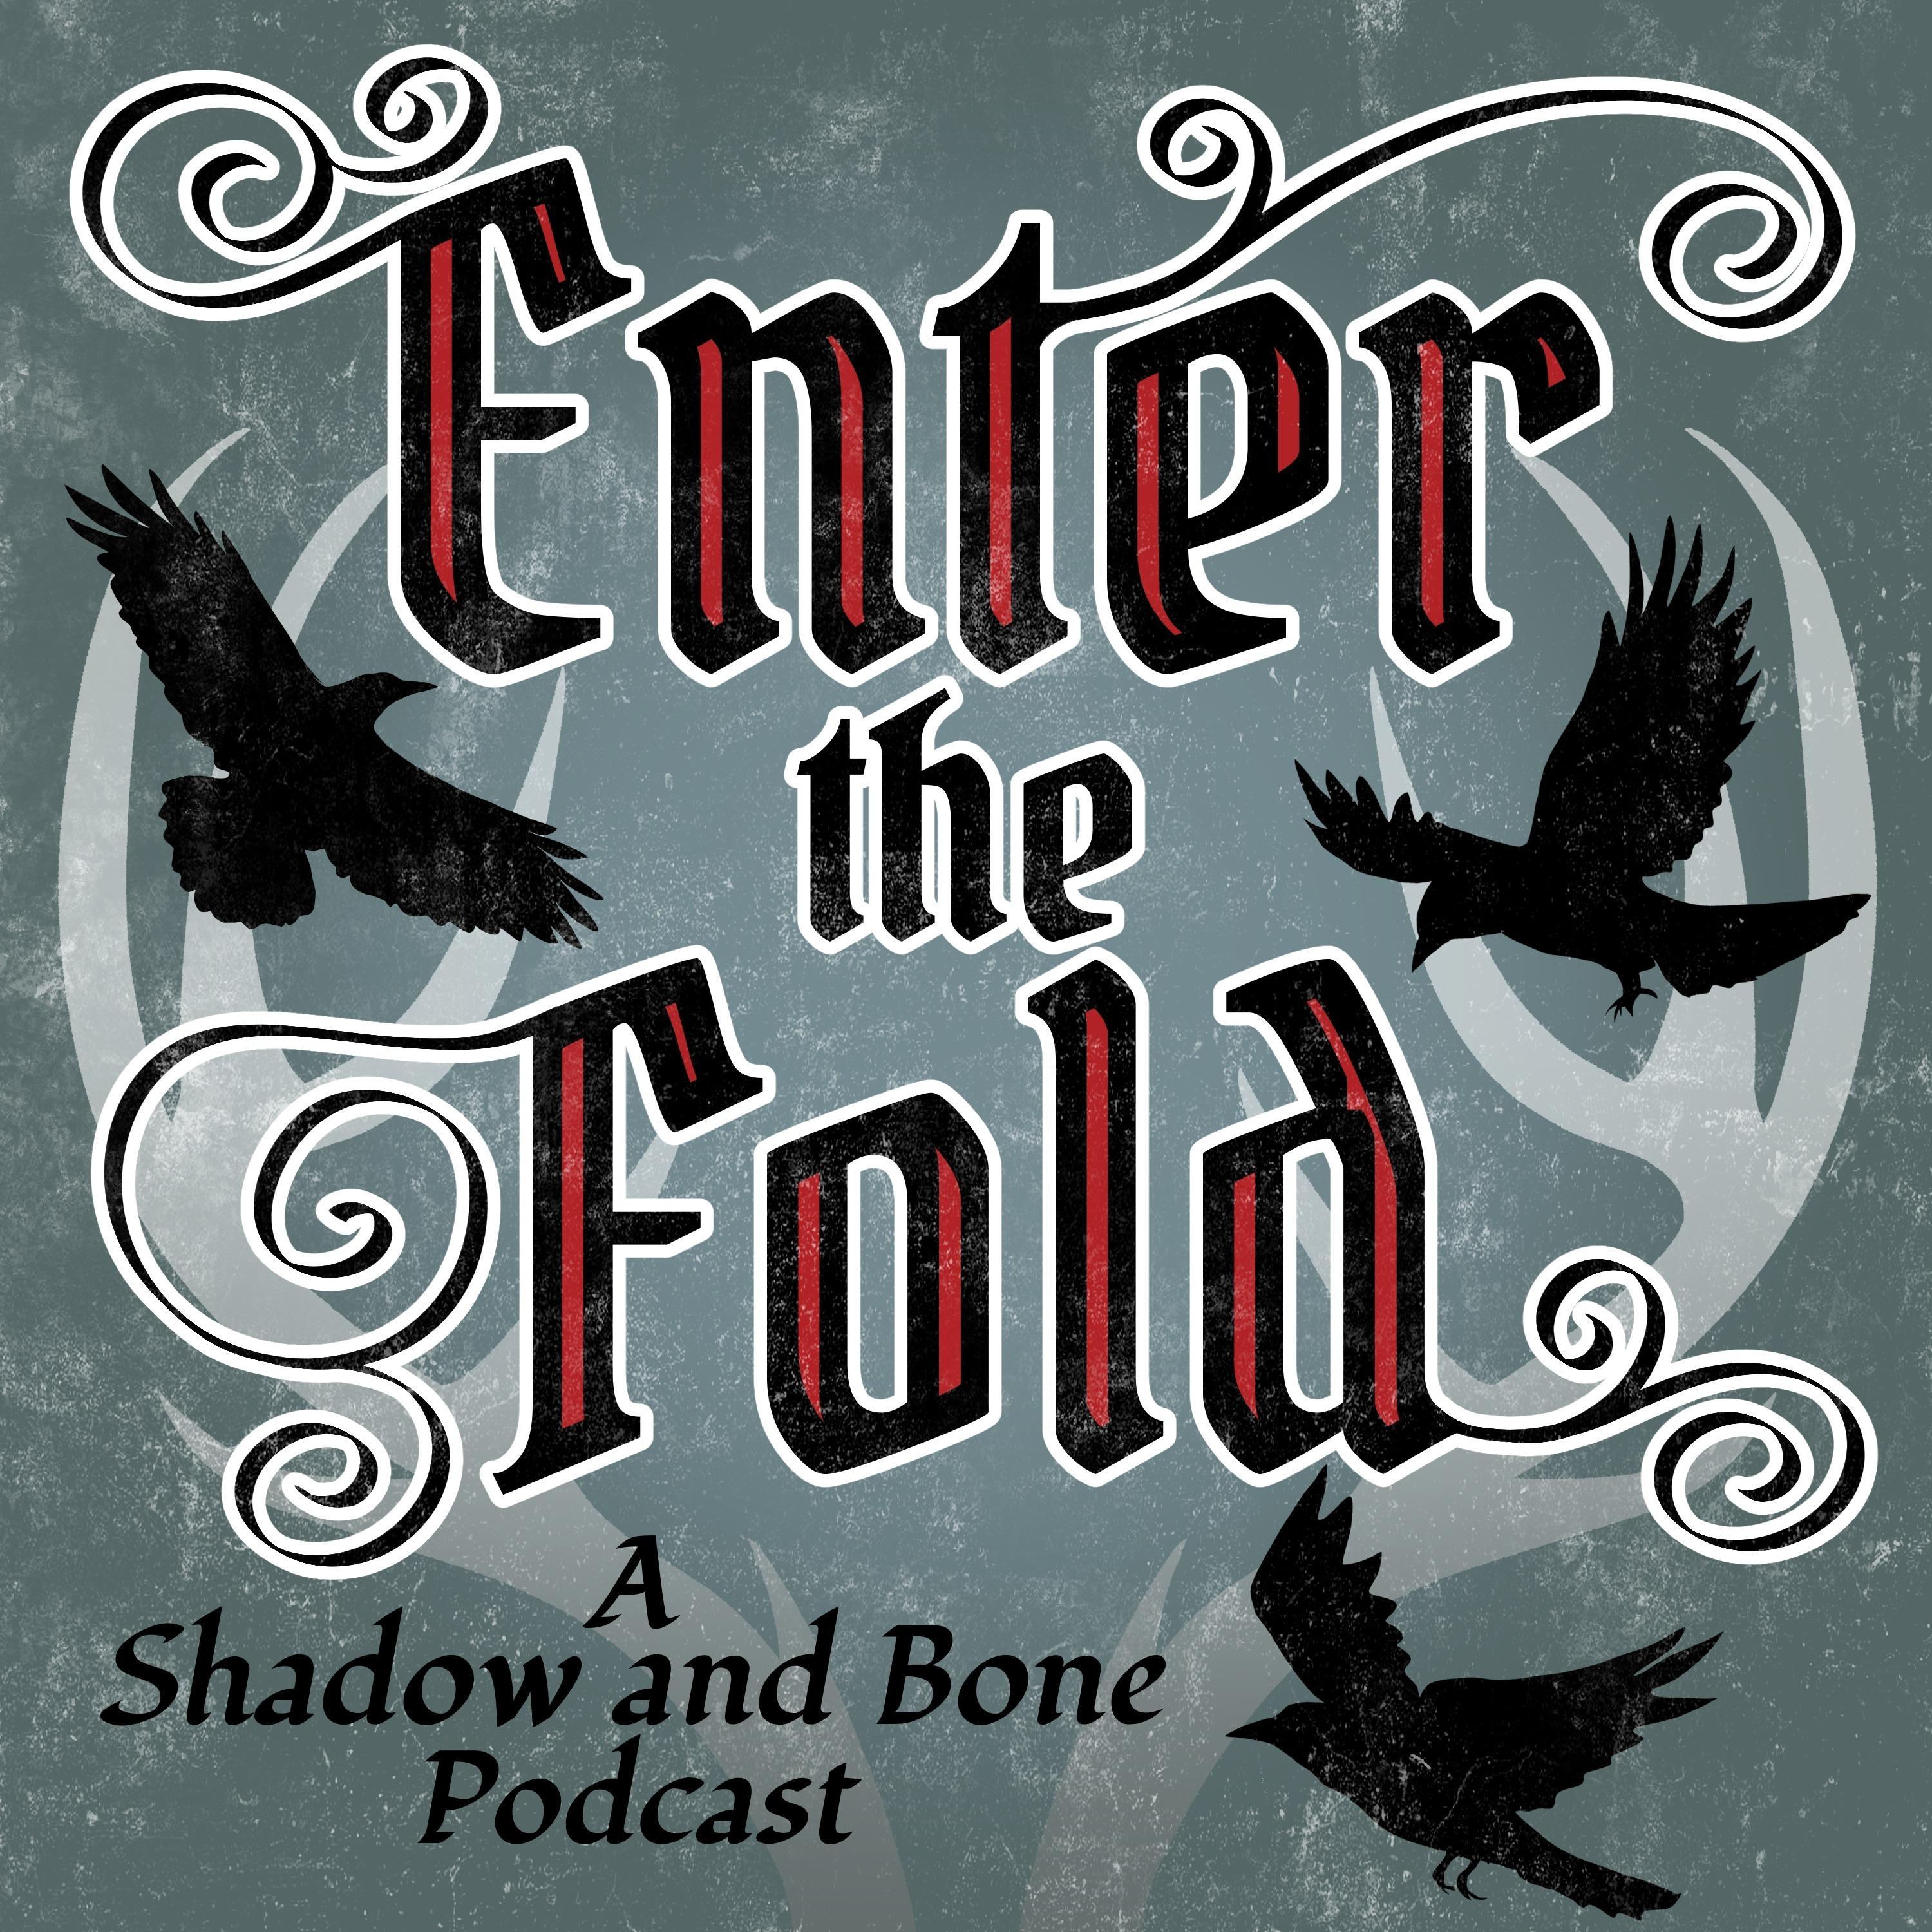 Enter the Fold: A Shadow and Bone Podcast